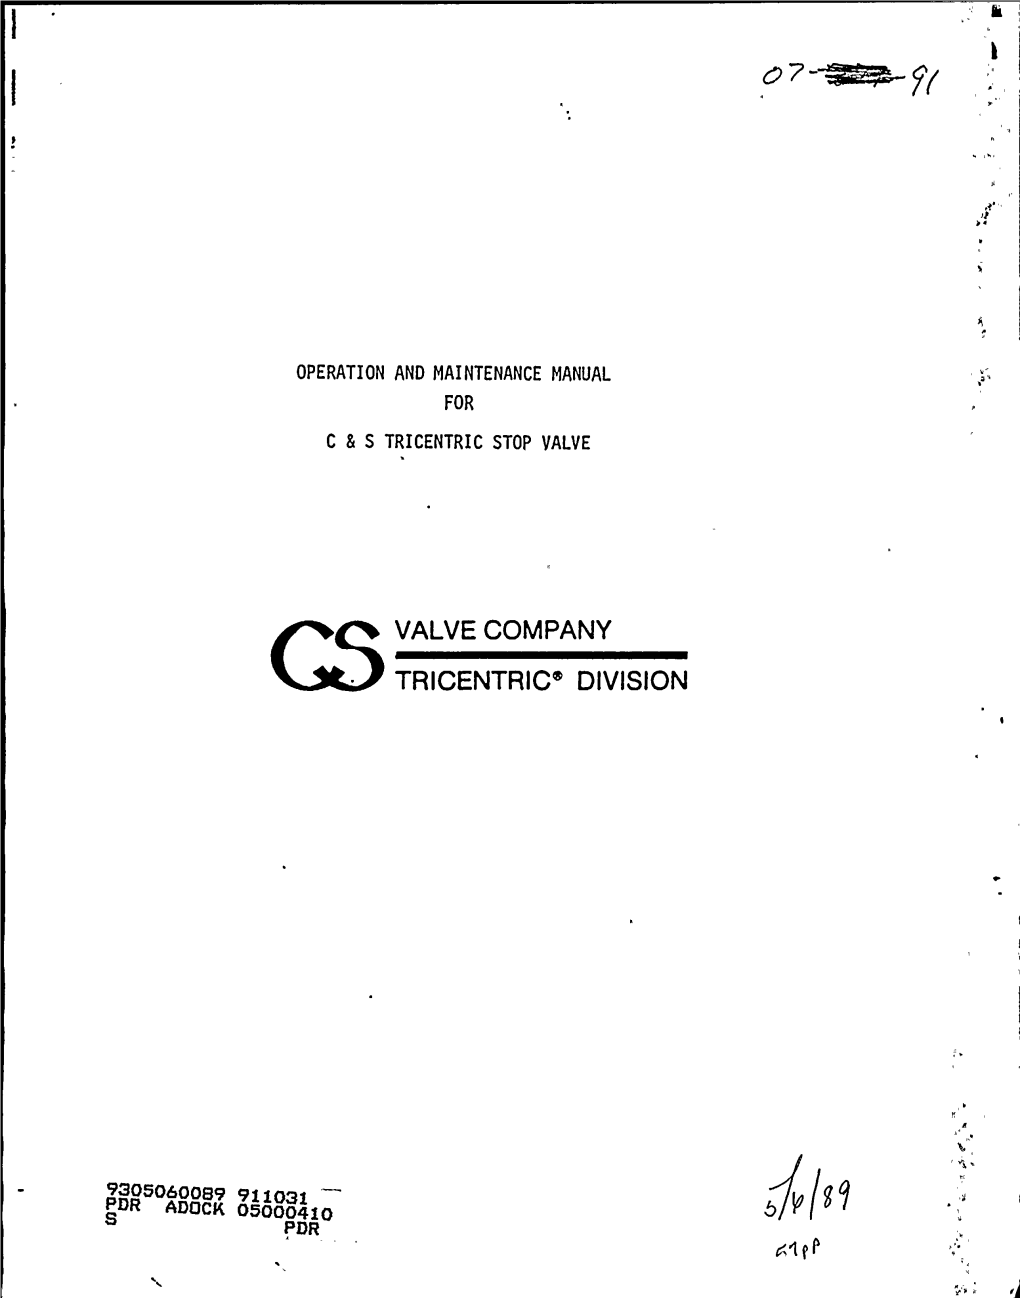 Undated "Operation & Maint Manual for C&S Tricentric Stop Valve